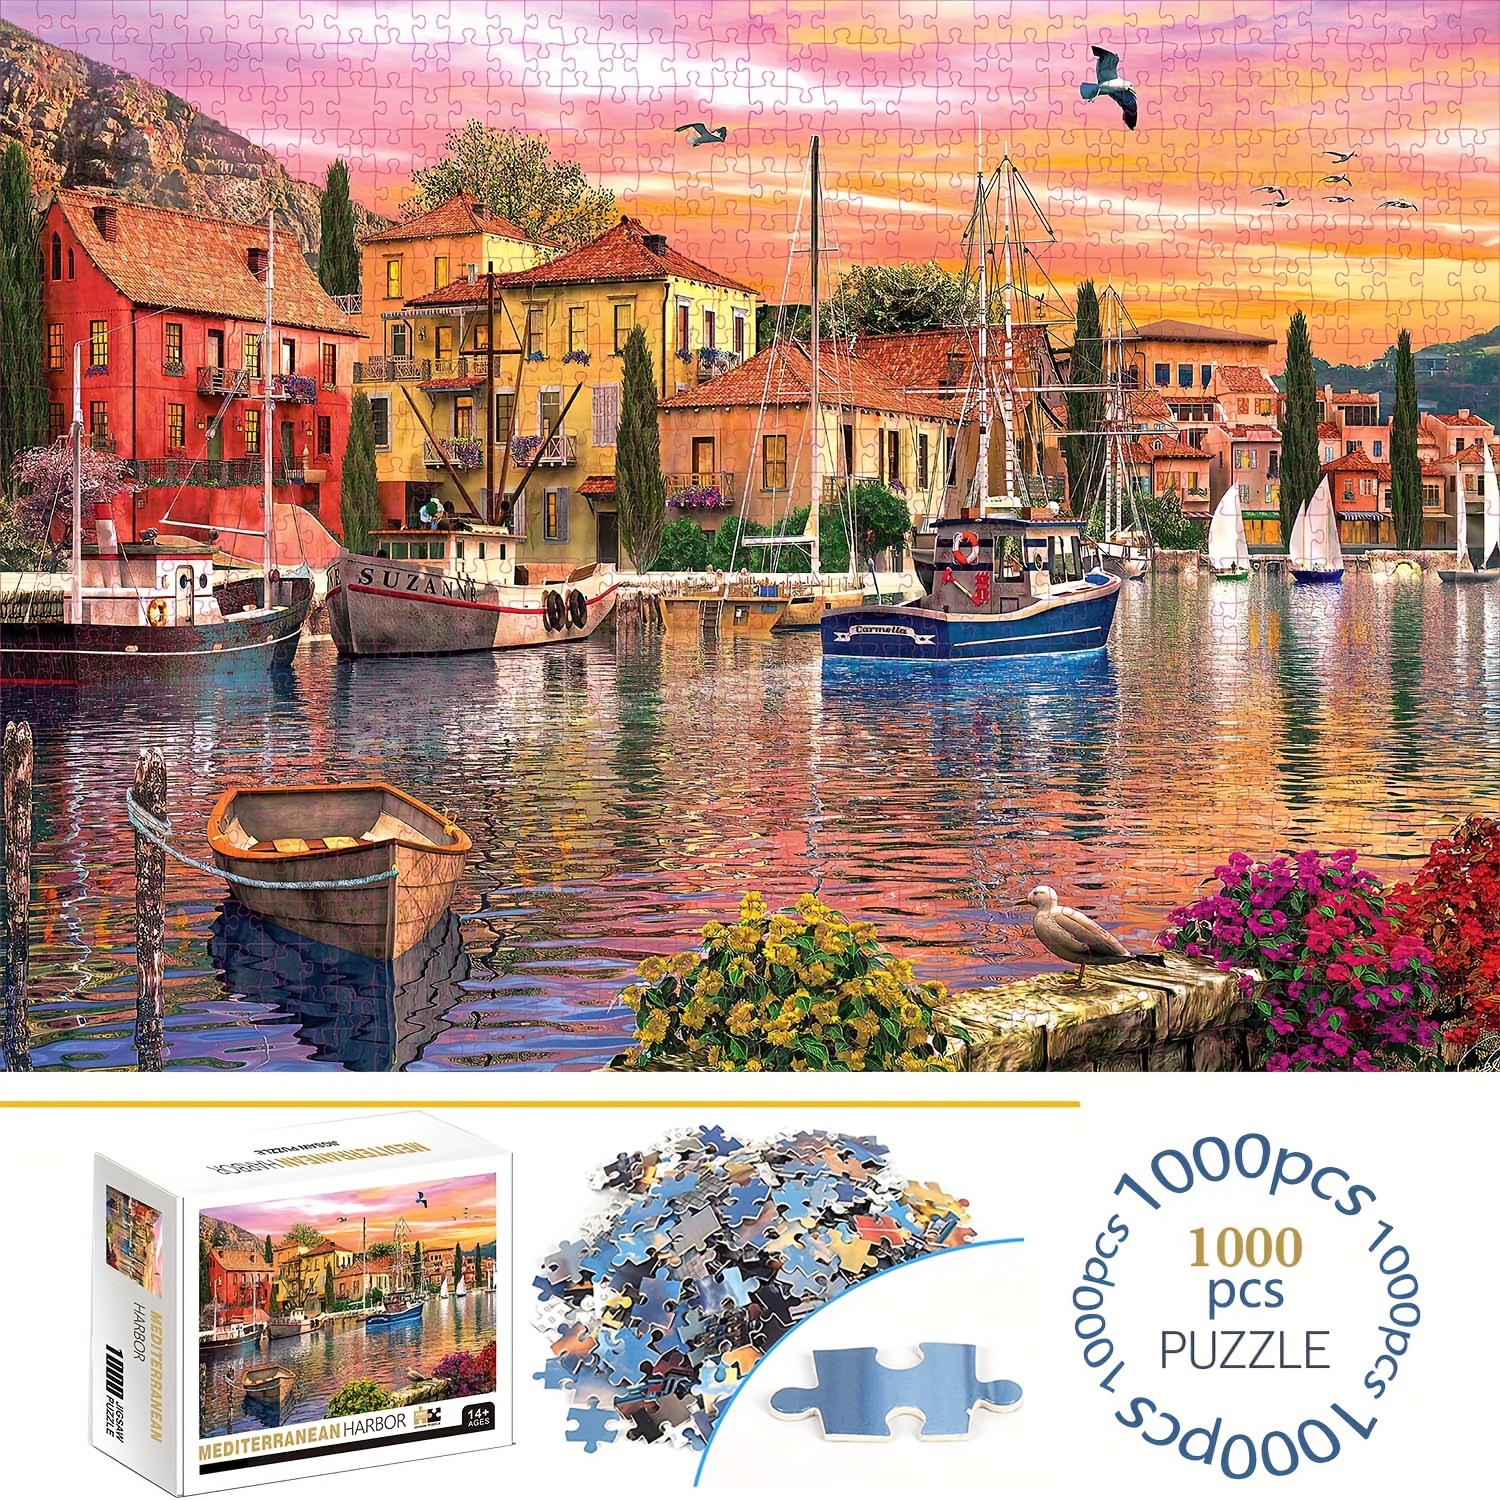 

1000pcs Mediterranean Harbor Puzzles, Thick And Durable Seamless Jigsaw Puzzles For Adults Premium Quality Fun Family Challenging Puzzles For Birthday, Christmas, Halloween, Thanksgiving, Easter